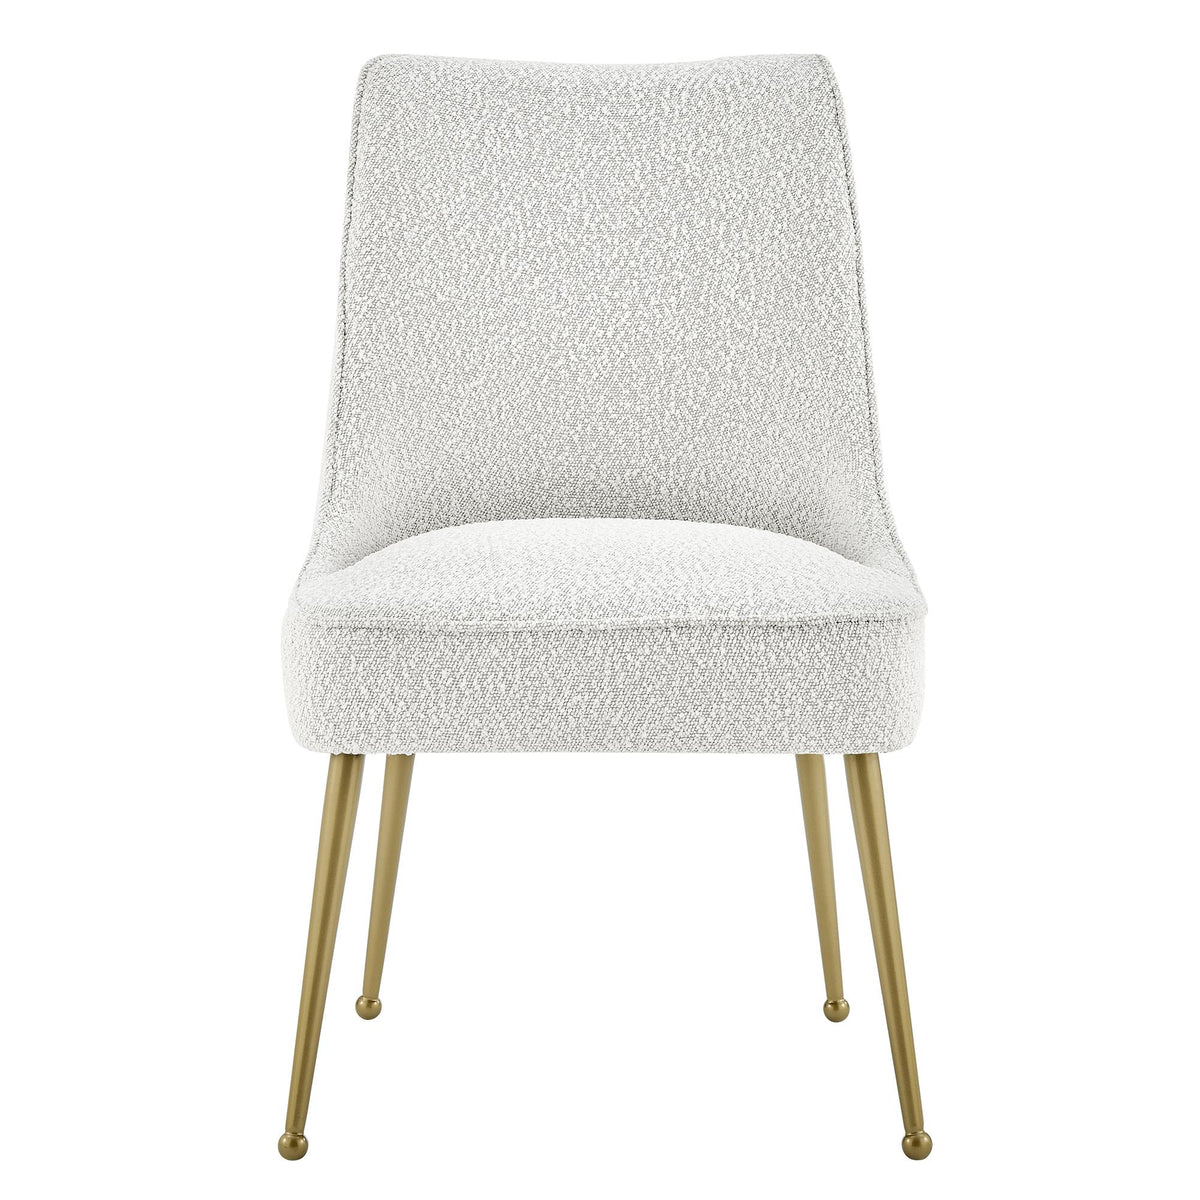 Cedric Fabric Dining Side Chair Gold Legs (Set of 2) by New Pacific Direct - 1250026